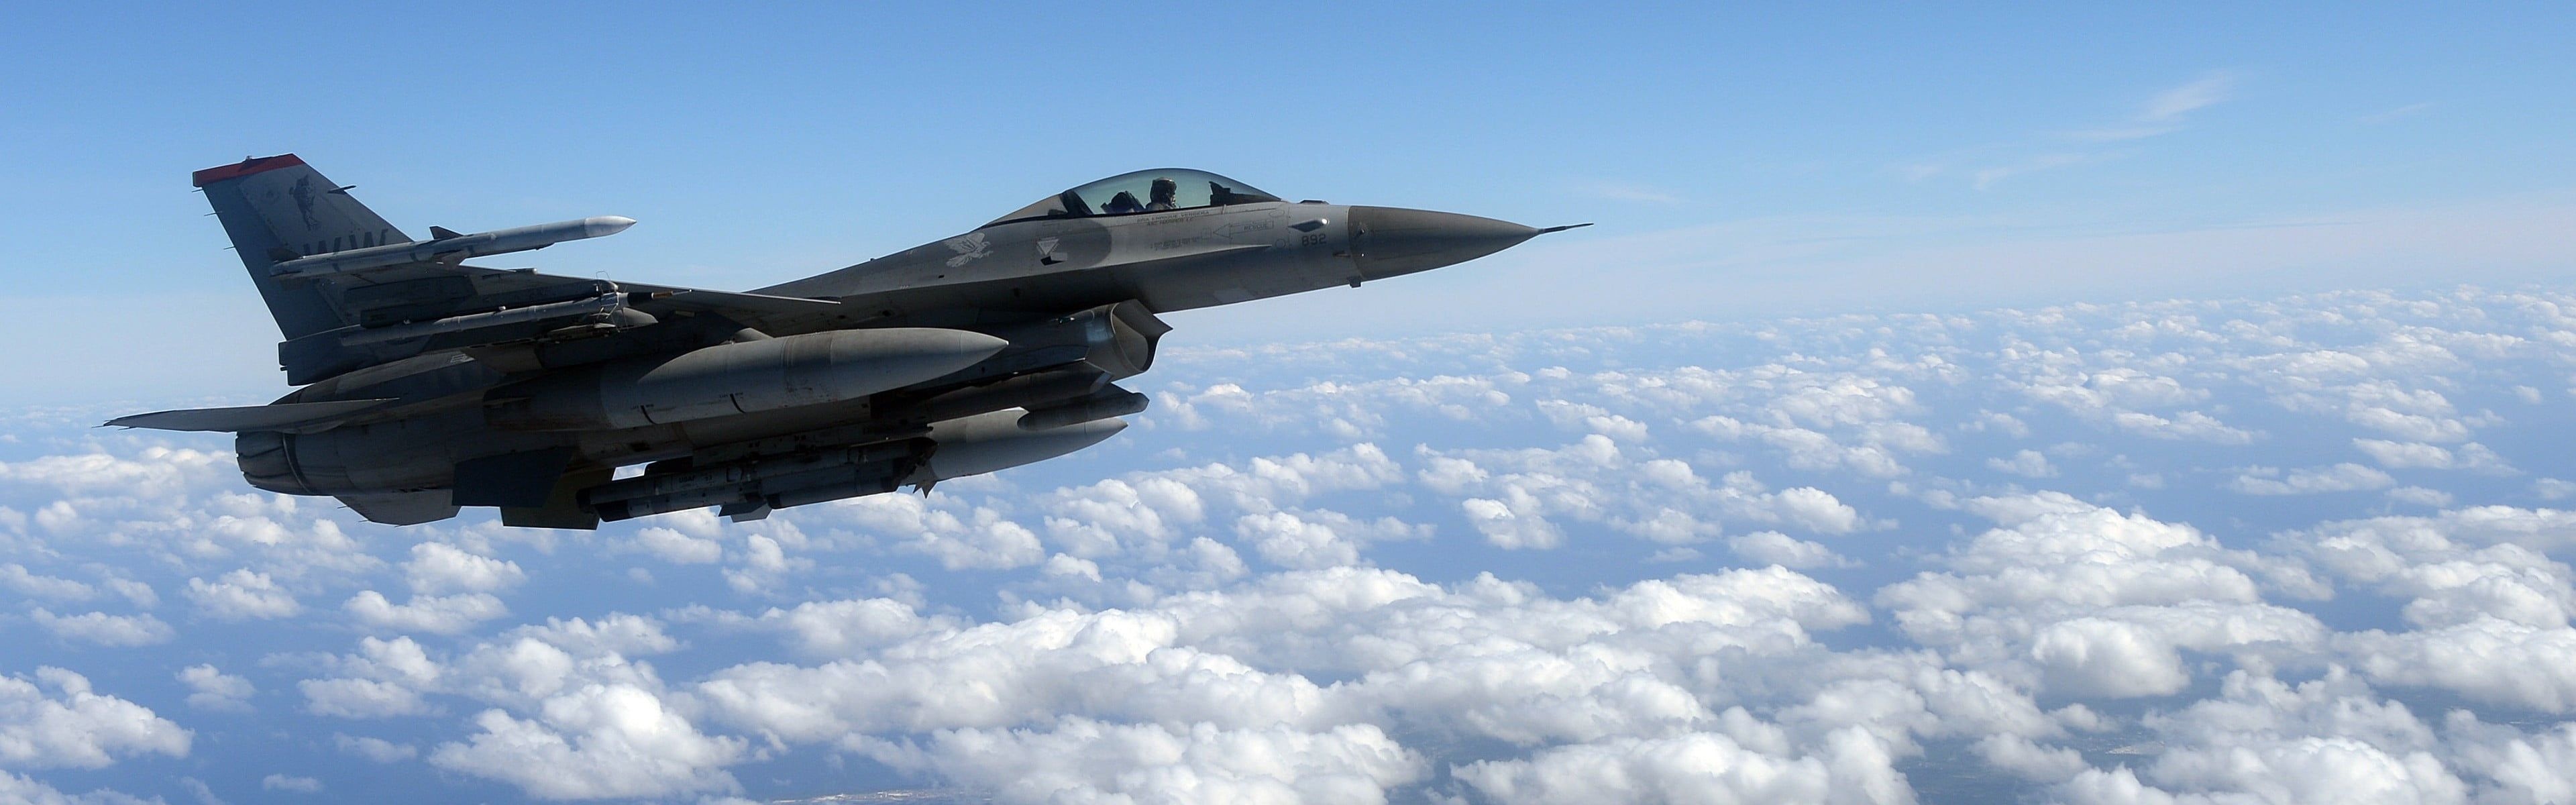 F-16 Fighting Falcon, General Dynamics prowess, Technological victory, Pilots' pride, Air superiority, 3840x1200 Dual Screen Desktop